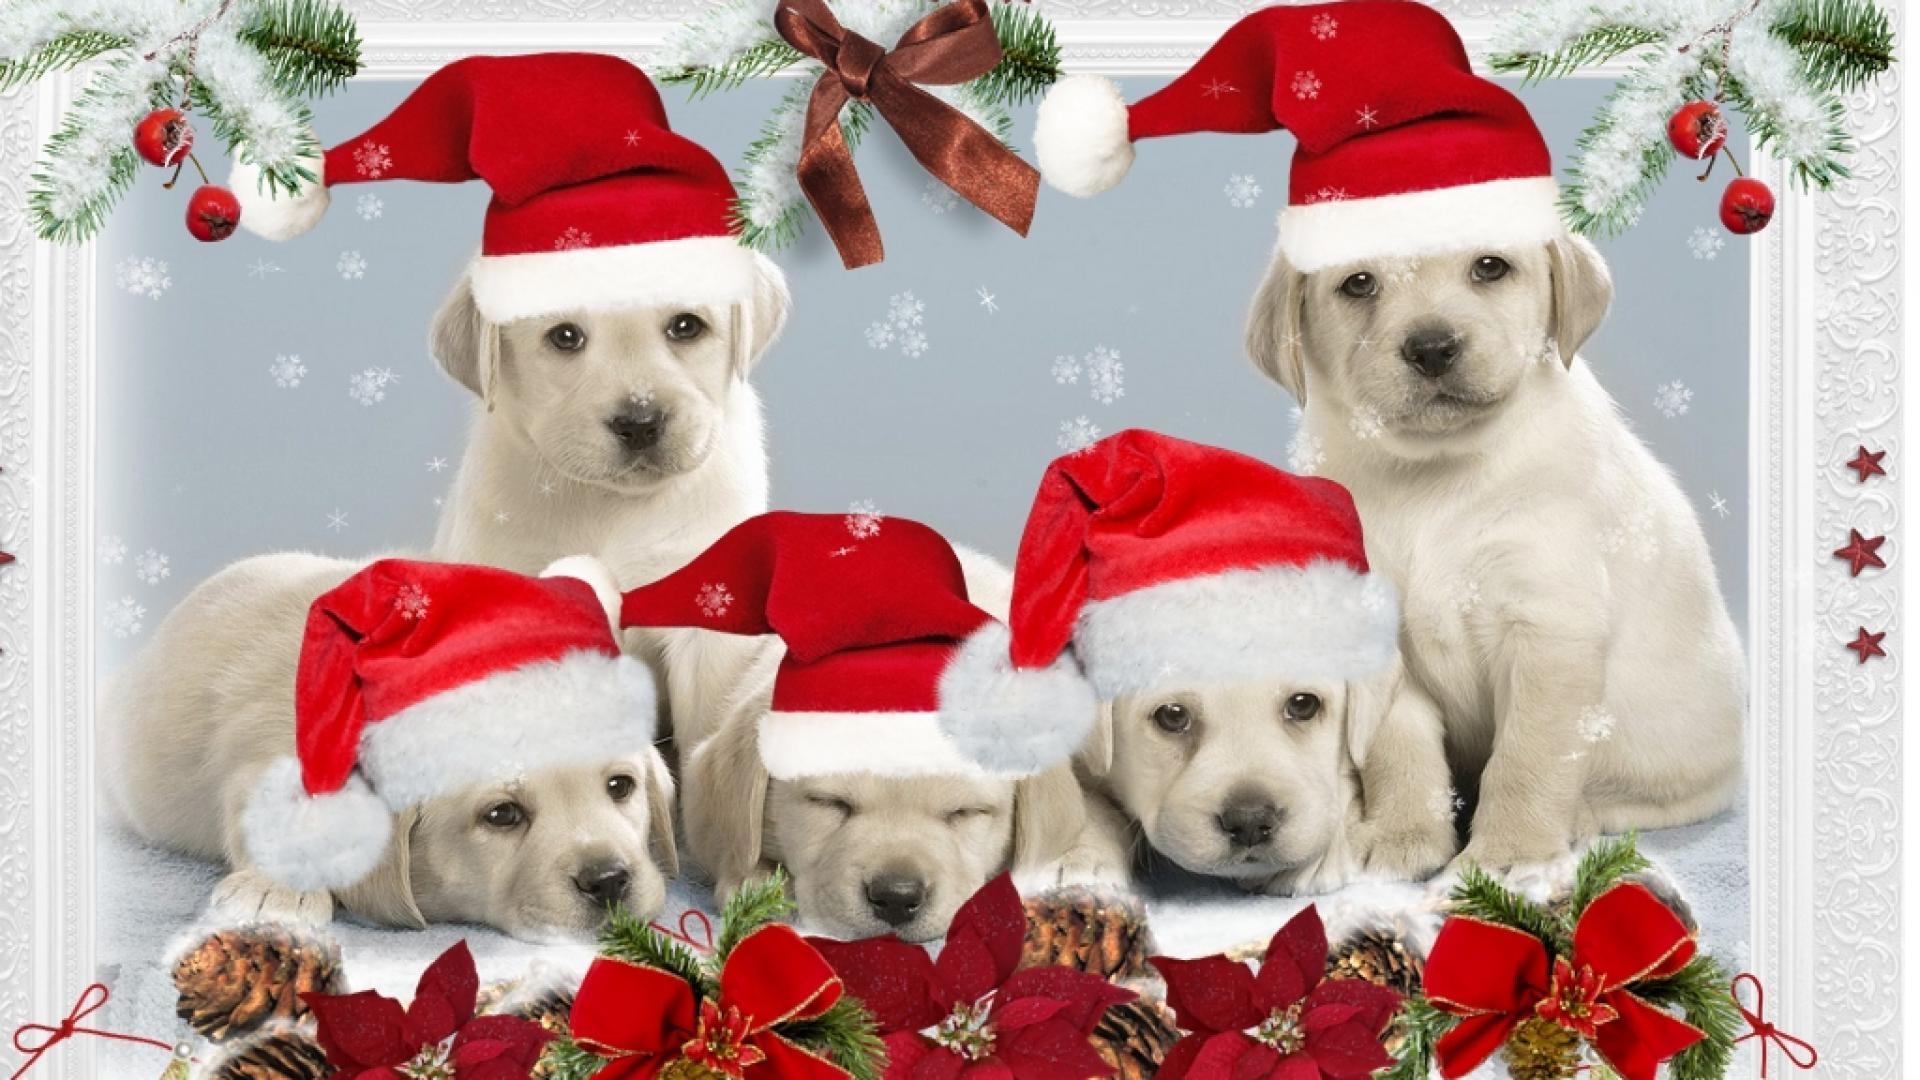 Pretty Christmas Wallpaper With Puppies